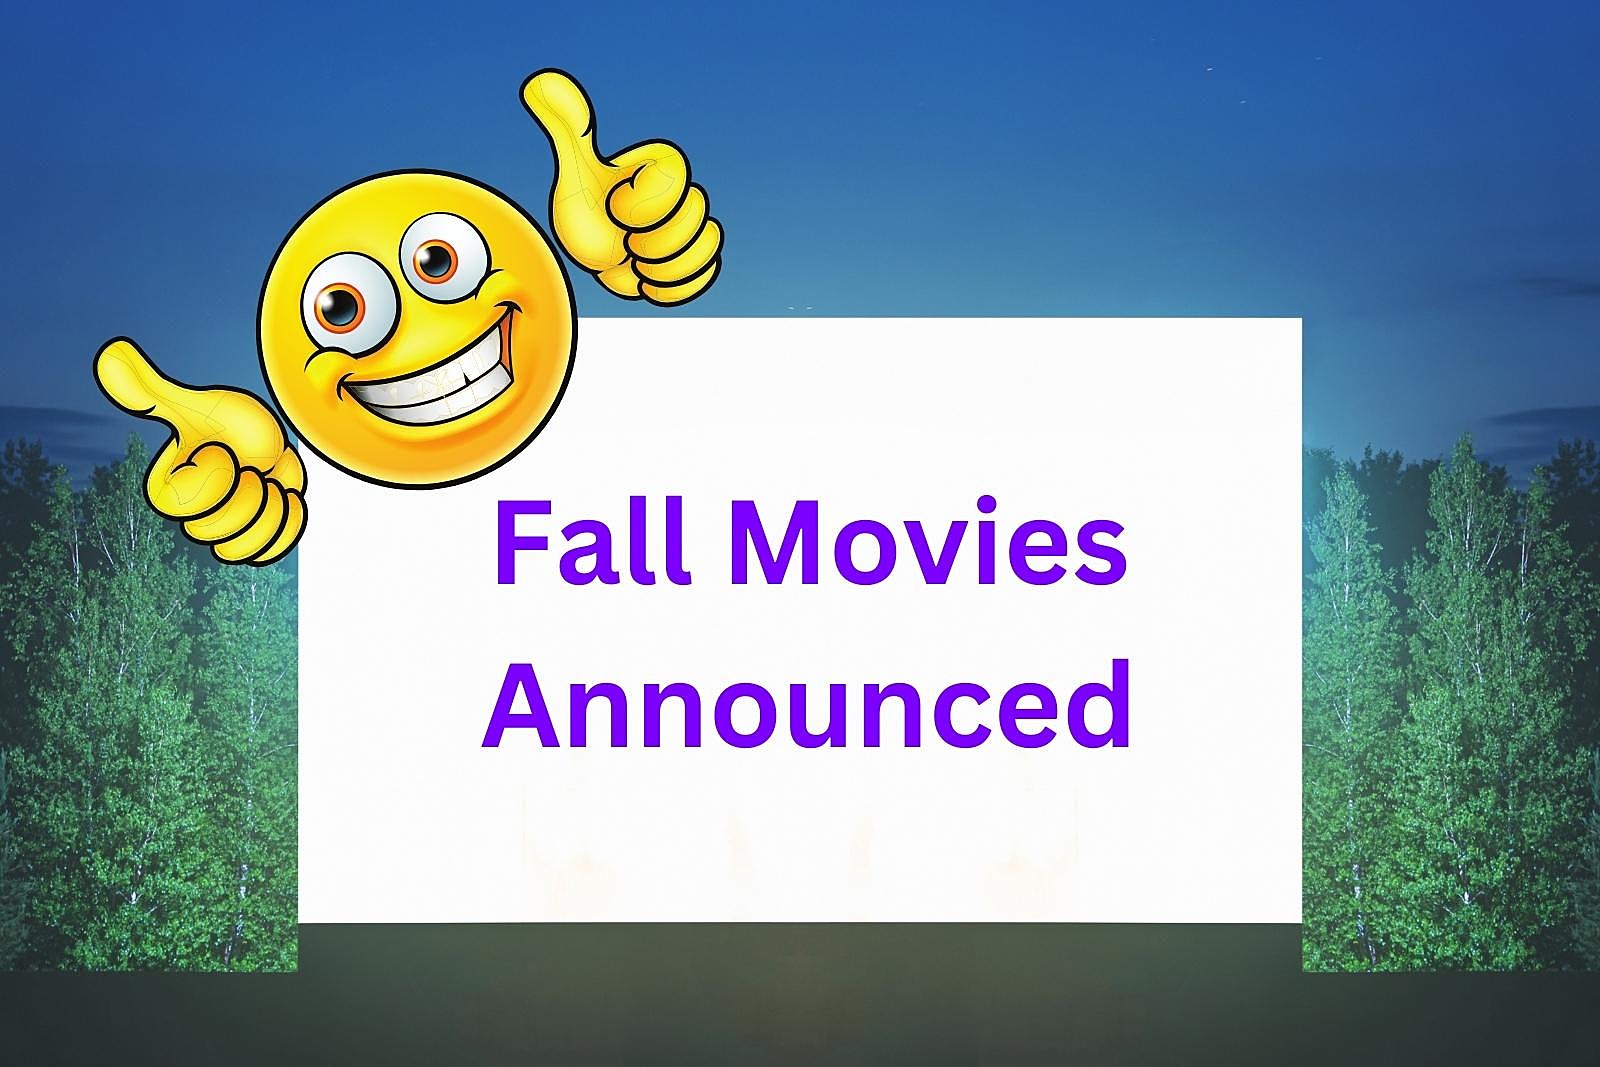 Enjoy Free Movies in The Park at Spring Lake Park This Fall image